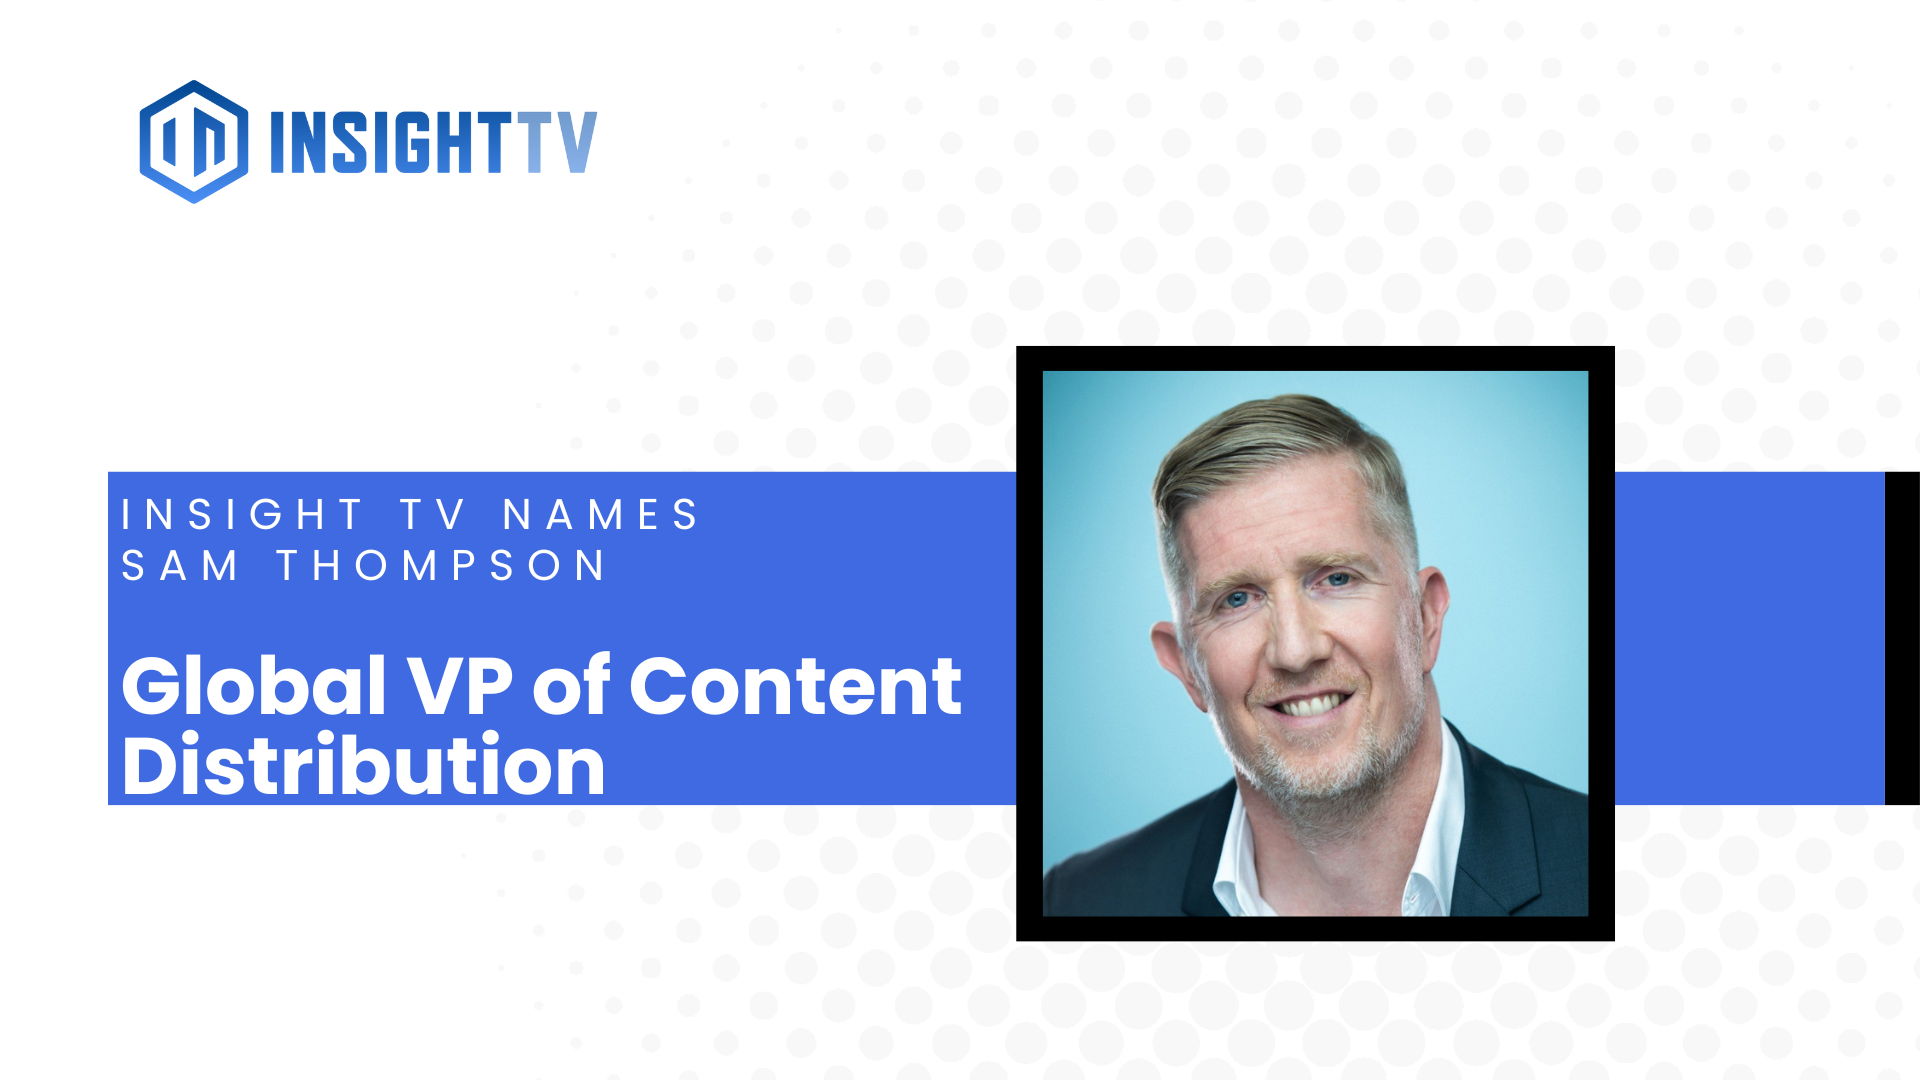 Sam Thompson named Insight TV’s Global VP of Content Distribution